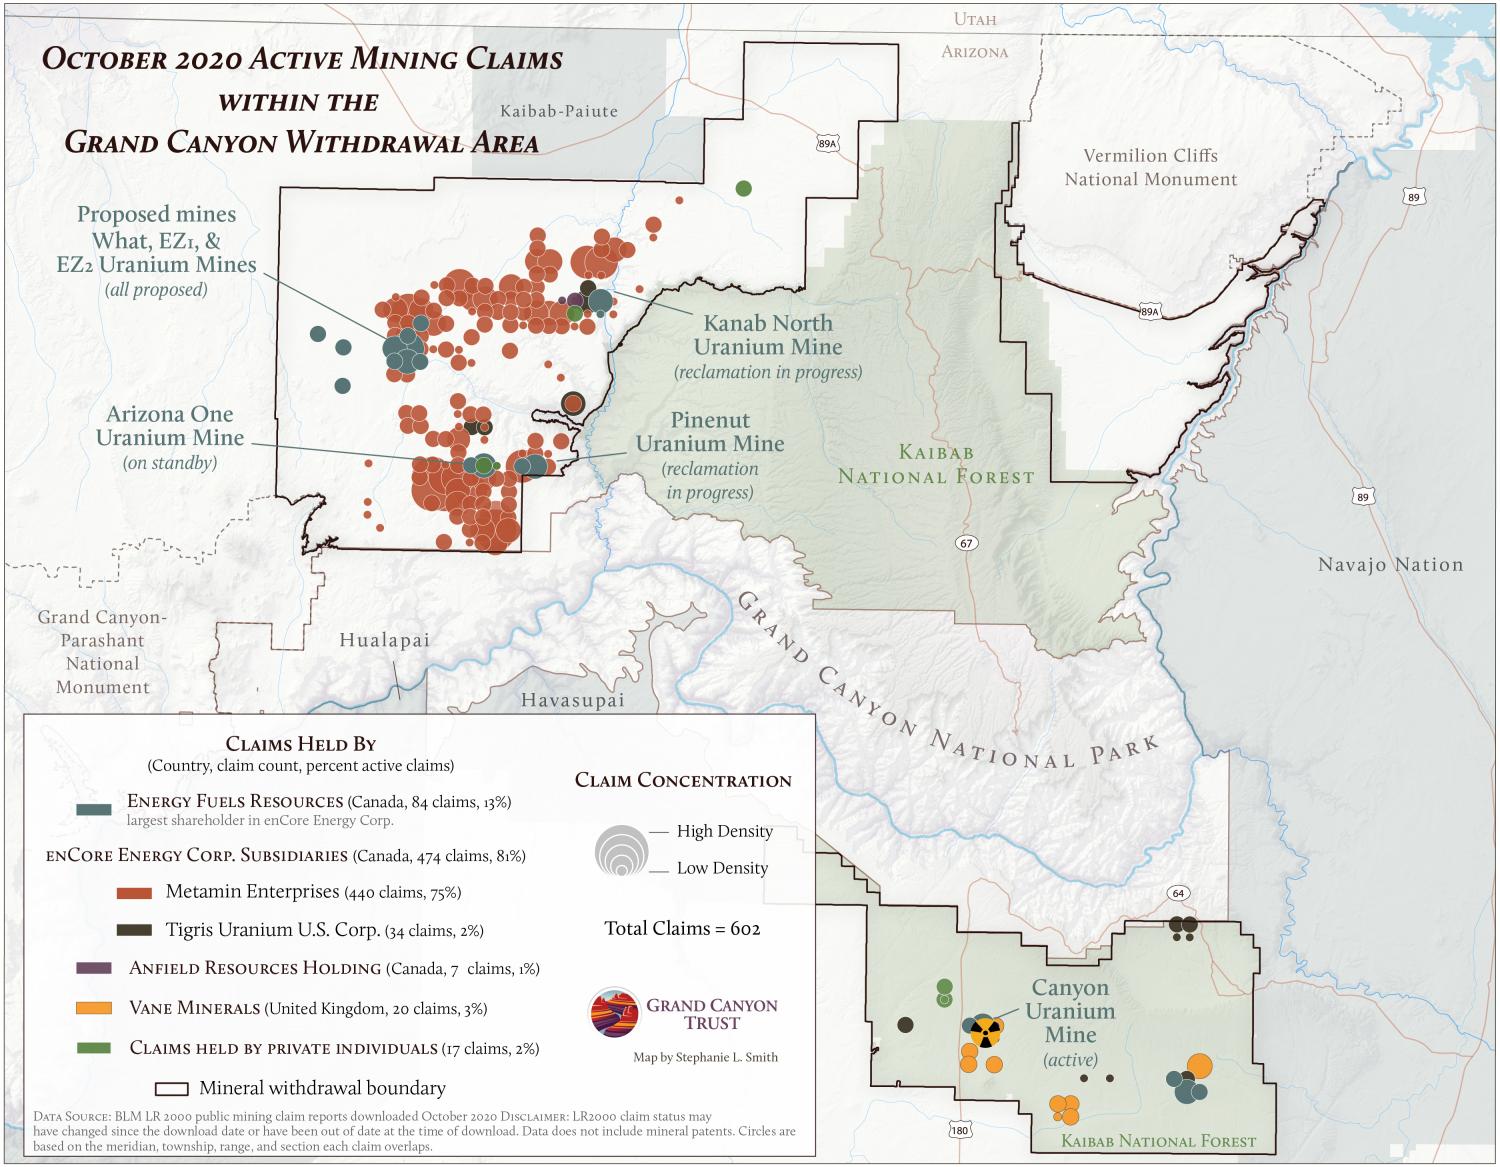 Active mining claims within the Grand Canyon withdrawal area, October 2020